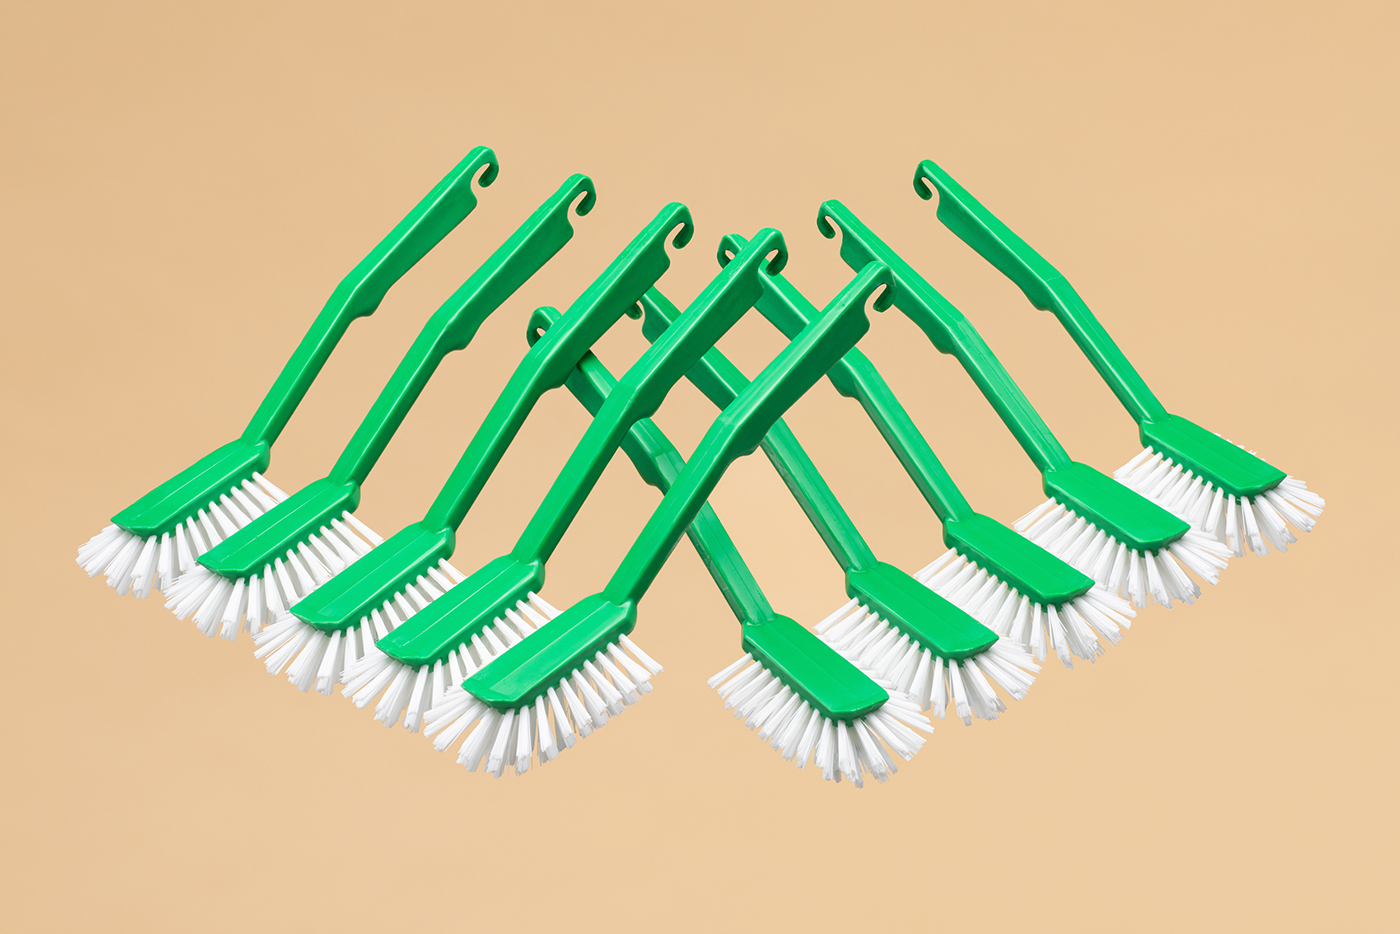 Dish brushes arranged in a graphical formation on a beige background by Tomas Olsen